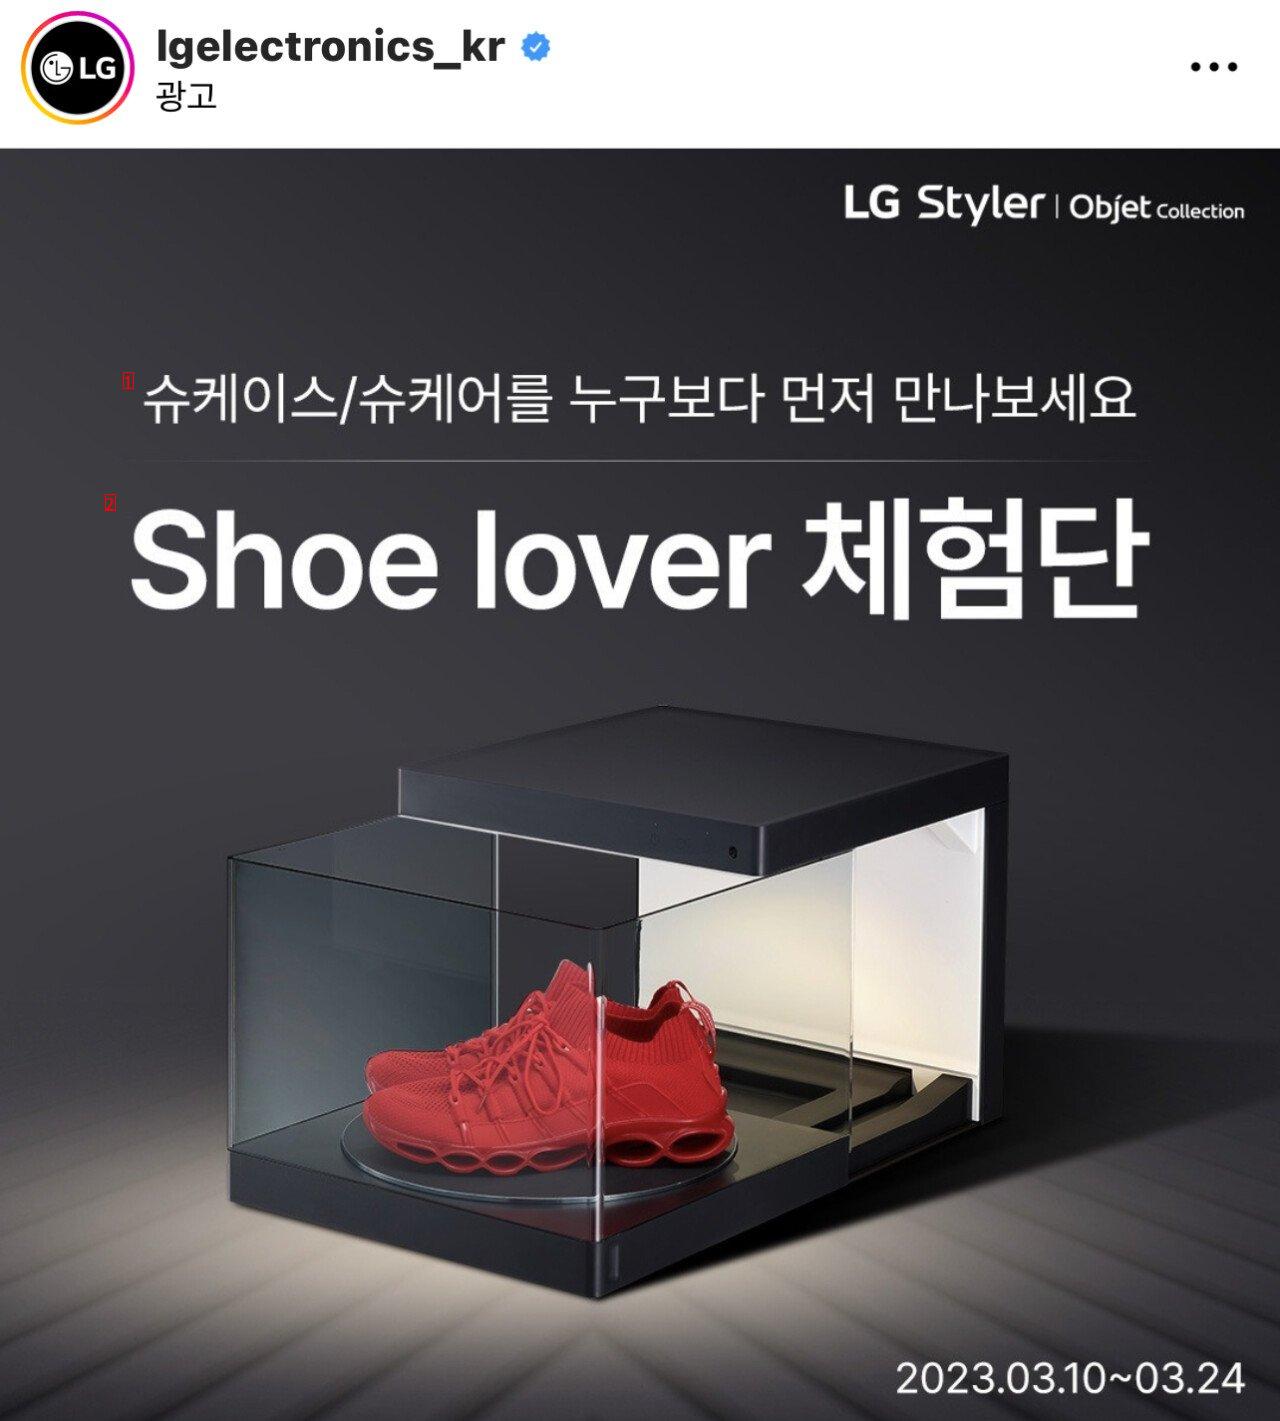 LG made the best new product ever. Shoux case